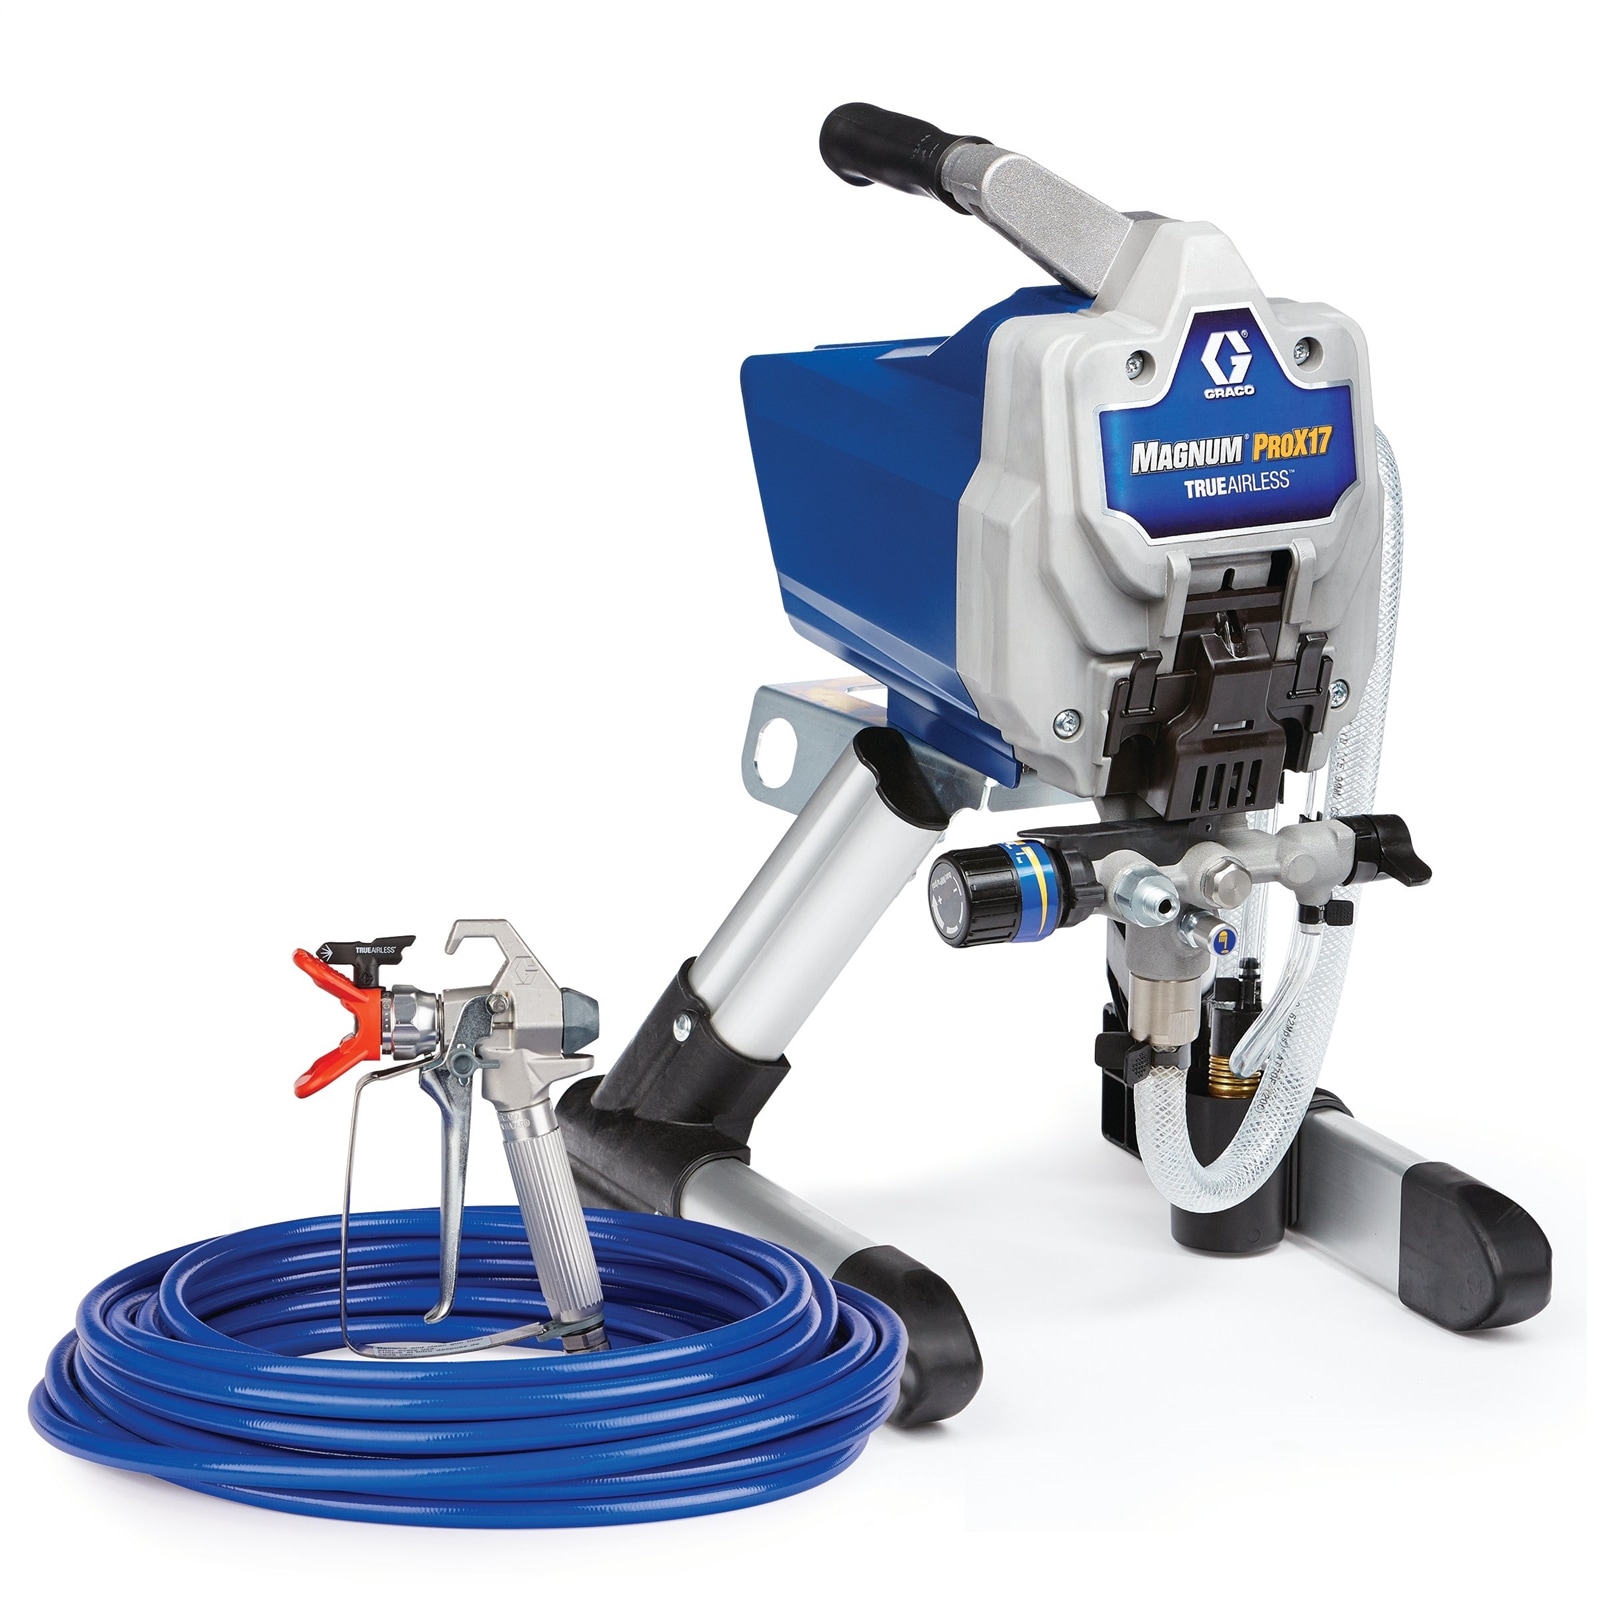 Graco Magnum ProX17 Electric Stationary Airless Paint Sprayer in the ...